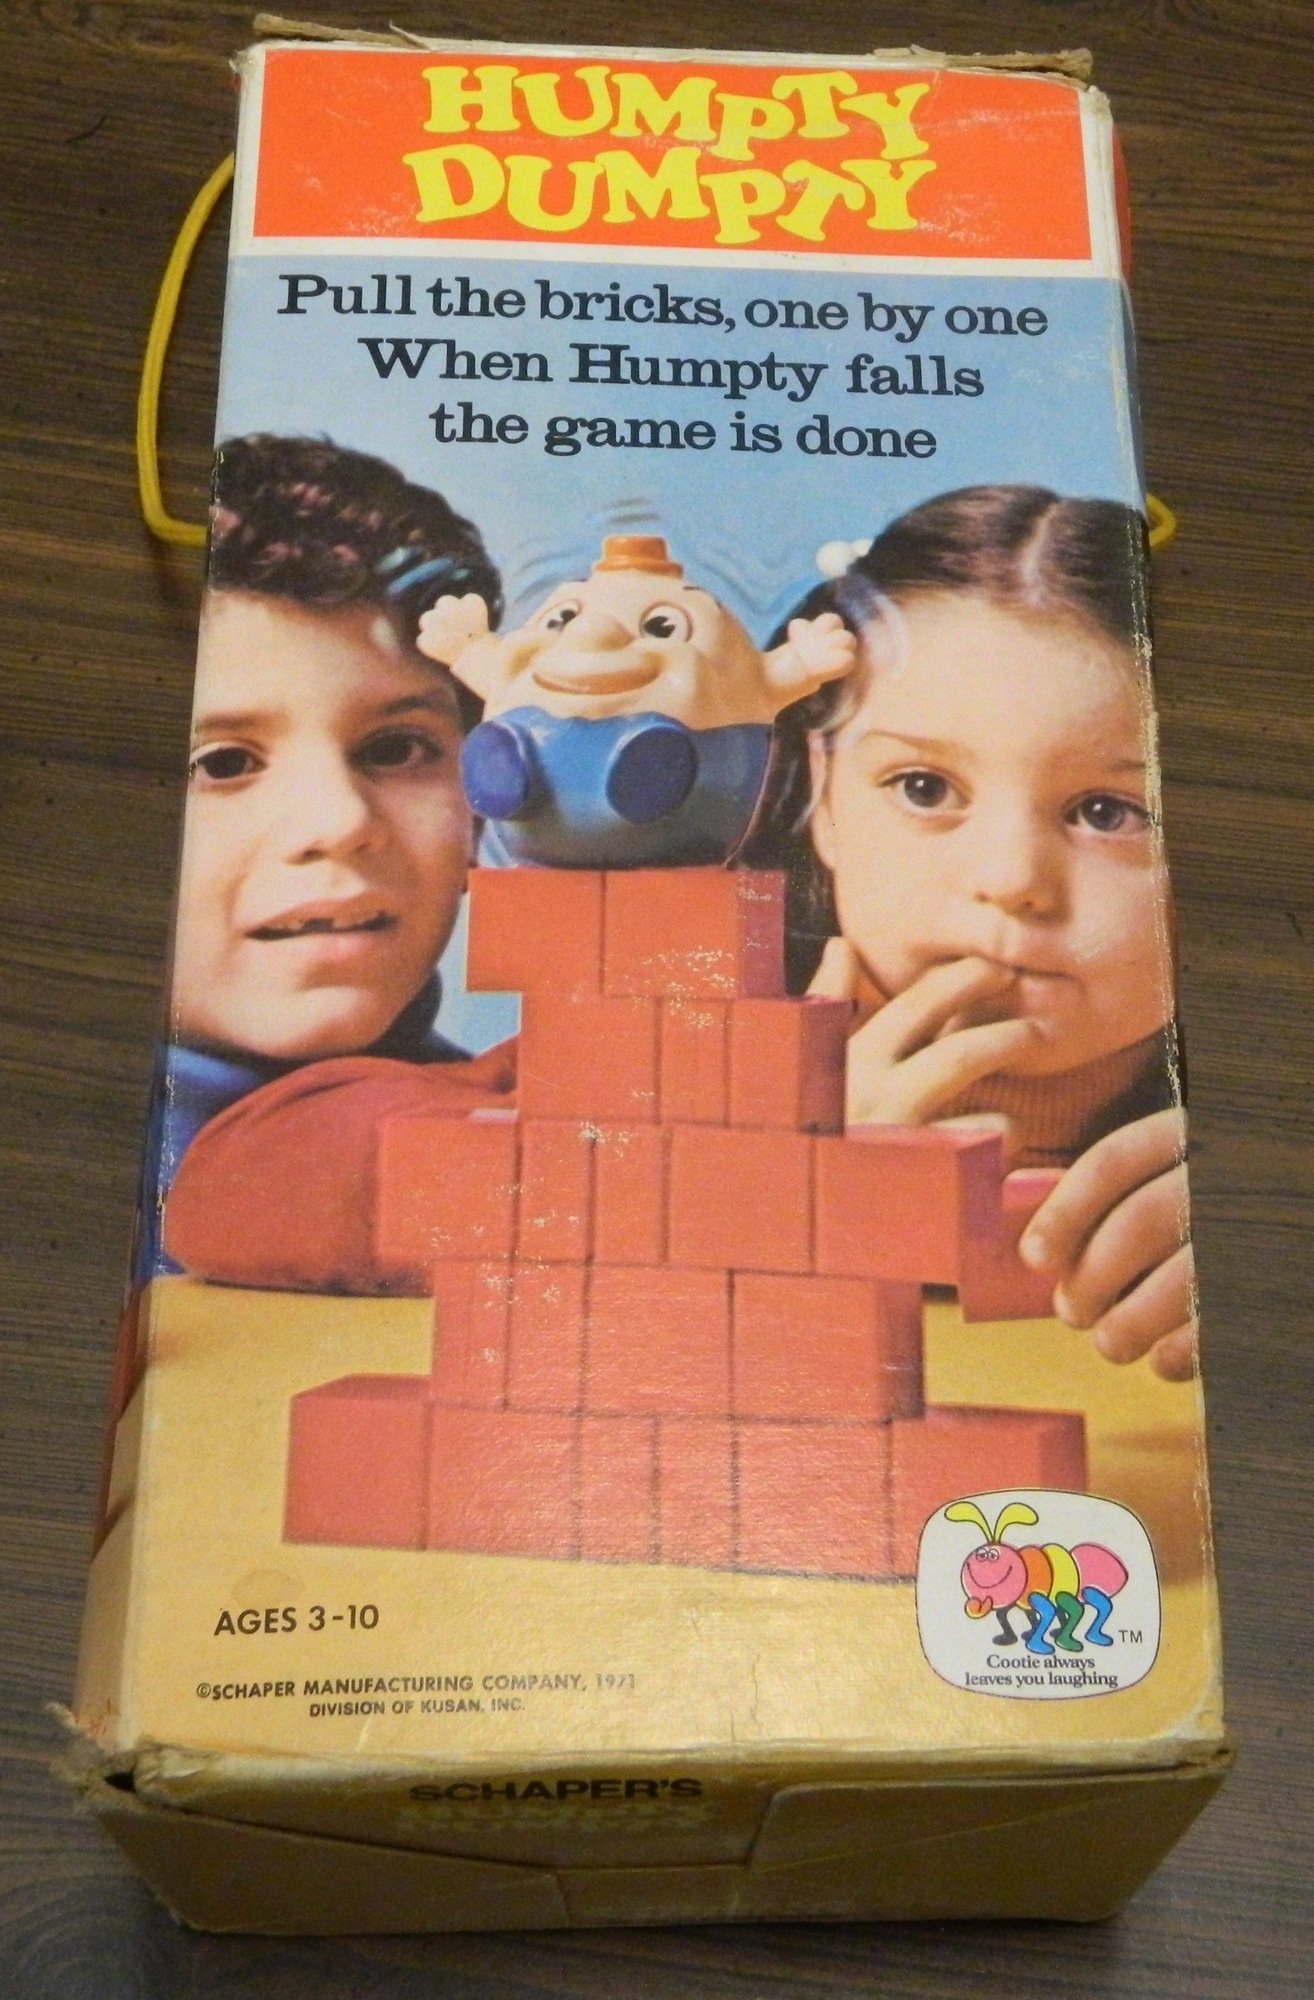 Humpty Dumpty Board Game Review and Rules